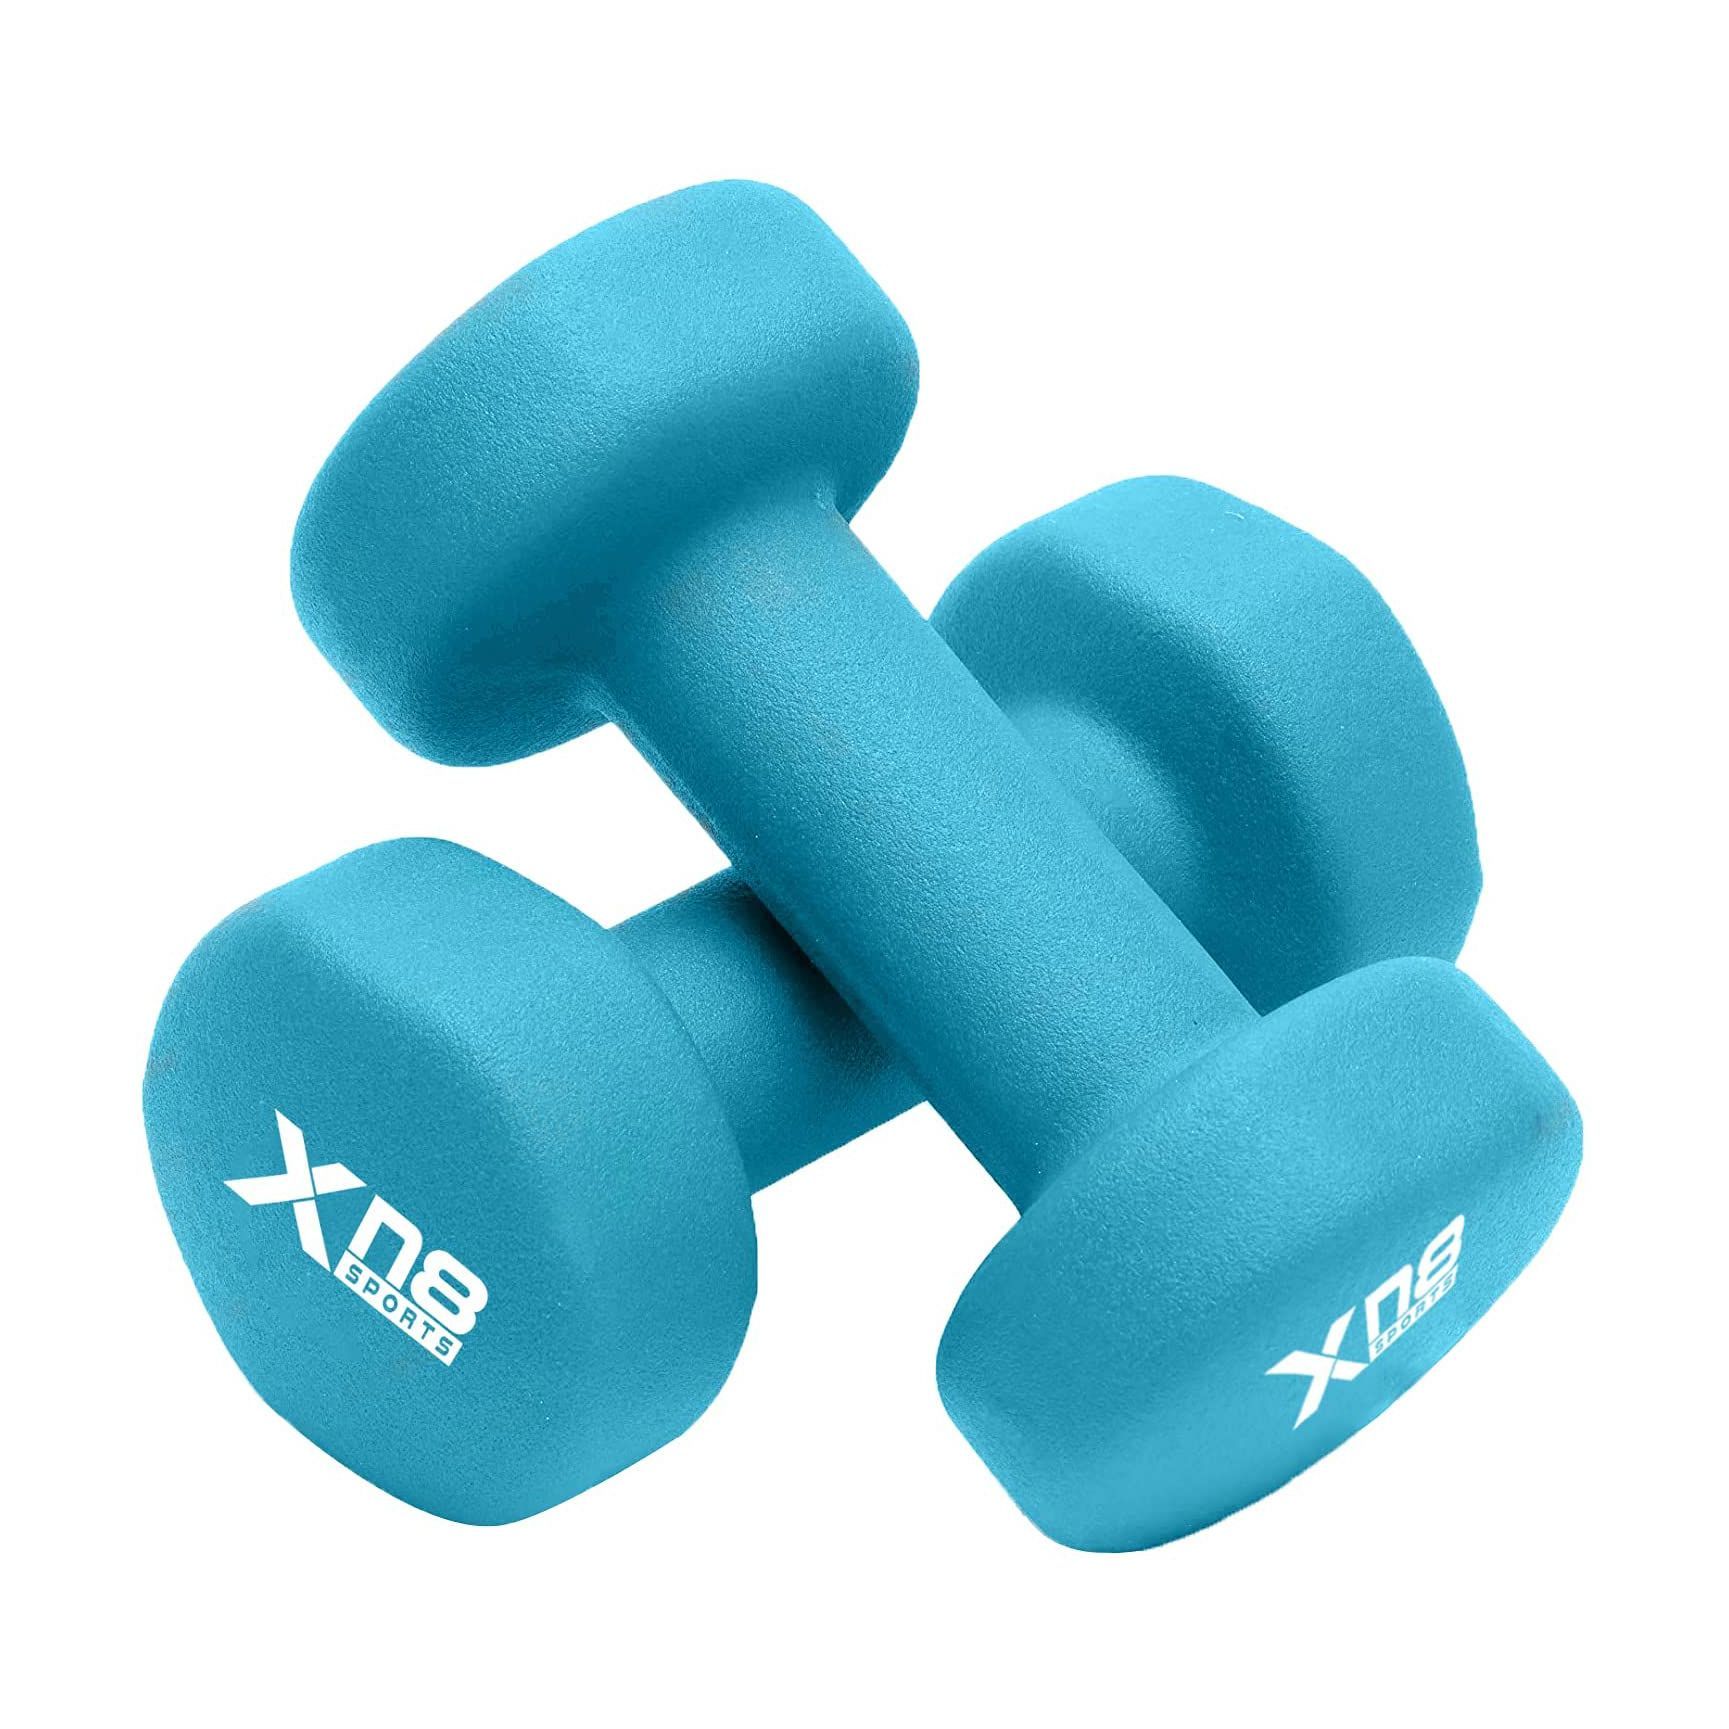 =2kg Neoprene Dumbbell Weights Set 2x 1kg Fitness/Gym/Workout/Yoga Fitness-MAD 